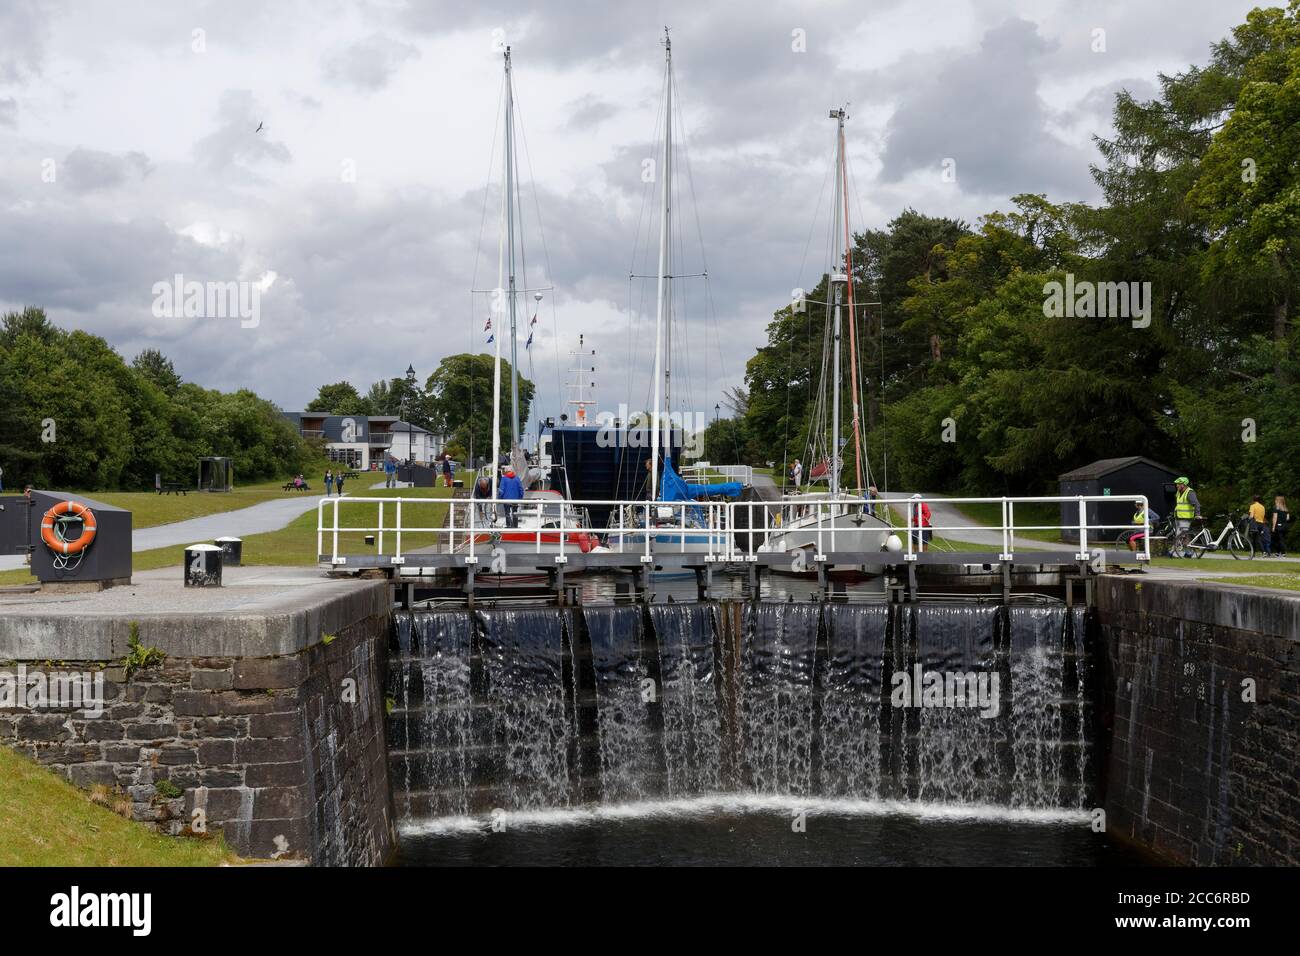 Yachts waiting as floodgates lower on Neptunes Staircase Caledonian Canal Fort William Scotland Stock Photo